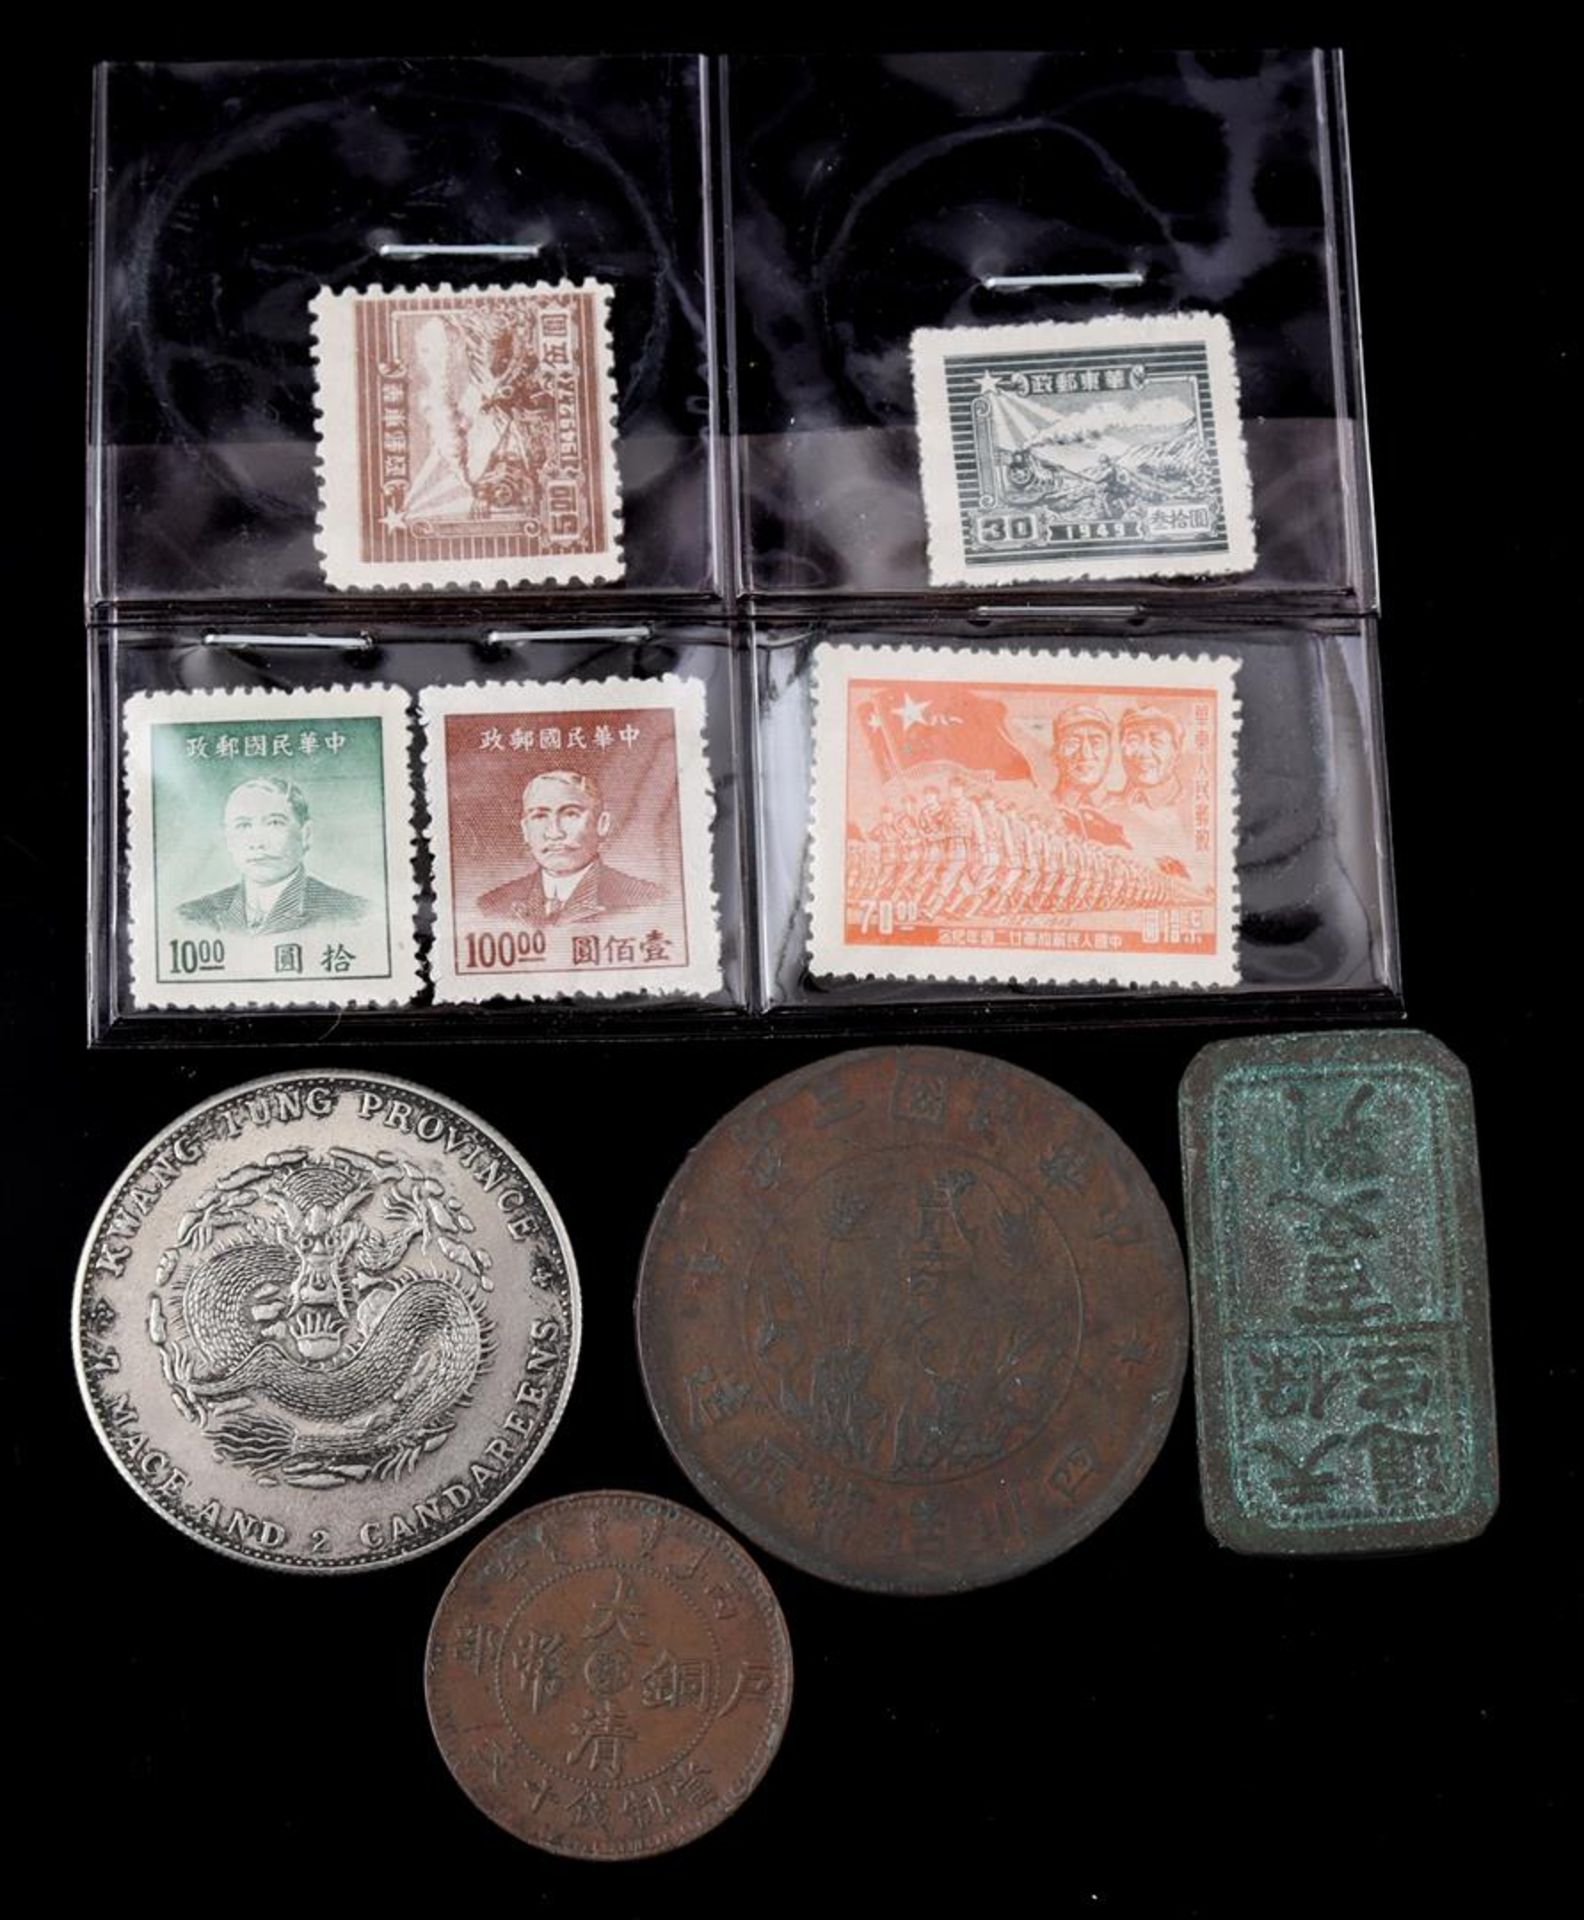 4 Chinese coins and 5 stamps